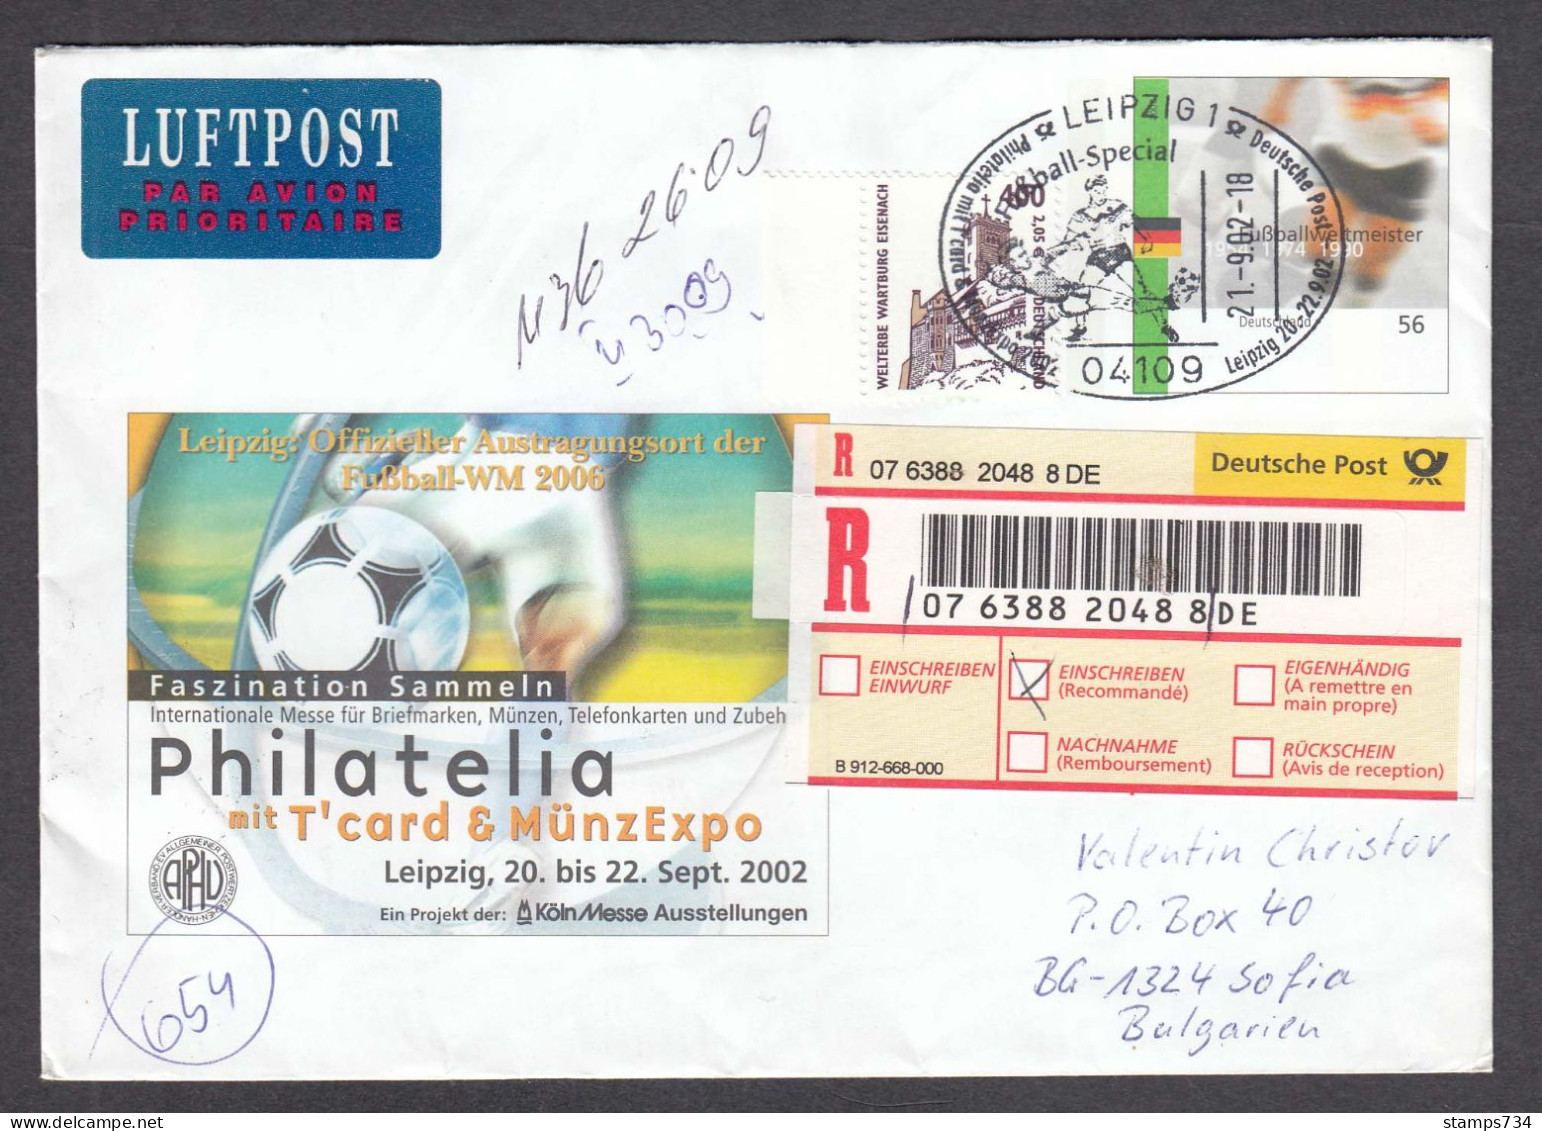 BRD 24/2002 - 56 C(Football), Philatelia With T'card & Coin Expo, Post. Stationery With Spec. Cancelation, Travel - Umschläge - Gebraucht